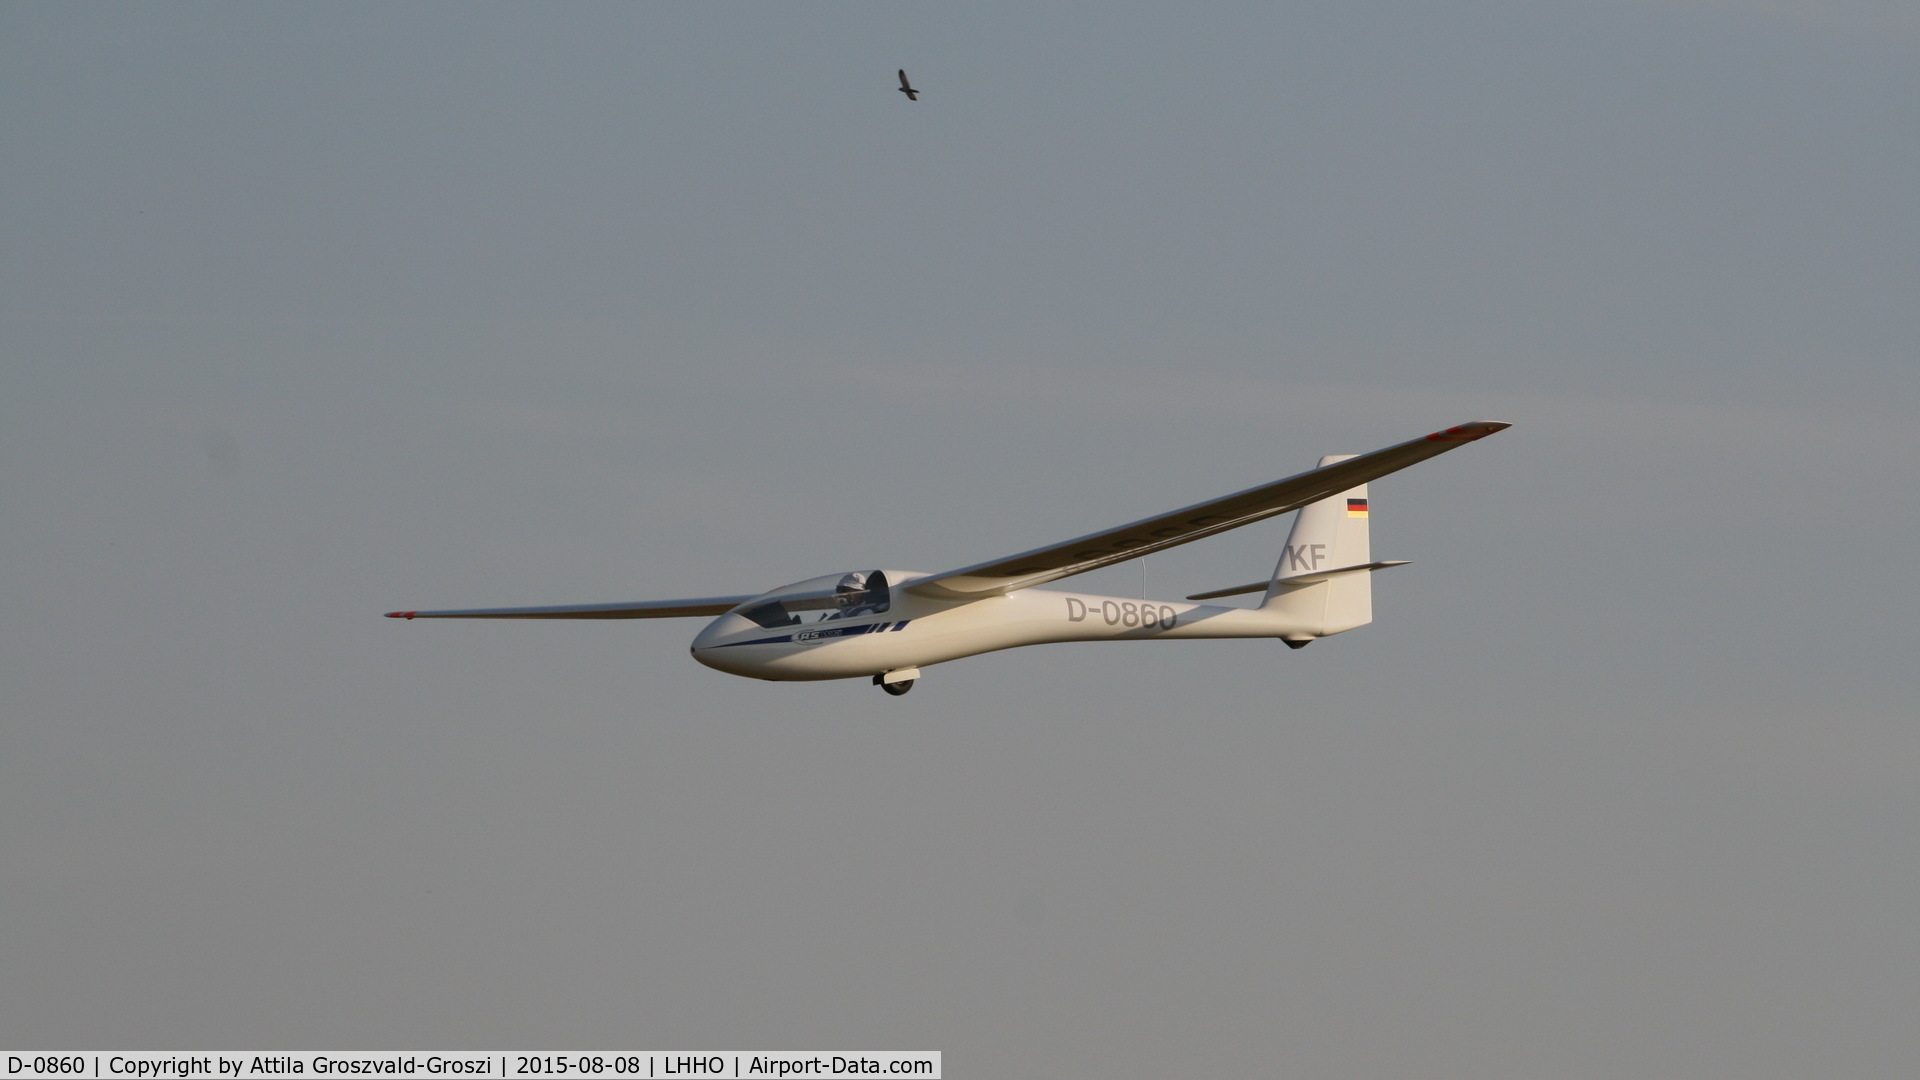 D-0860, 1971 Schleicher ASW-15 C/N 15177, Hajdúszoboszló Airport, Hungary - 60. Hungary Gliding National Championship and third Civis Thermal Cup, 2015